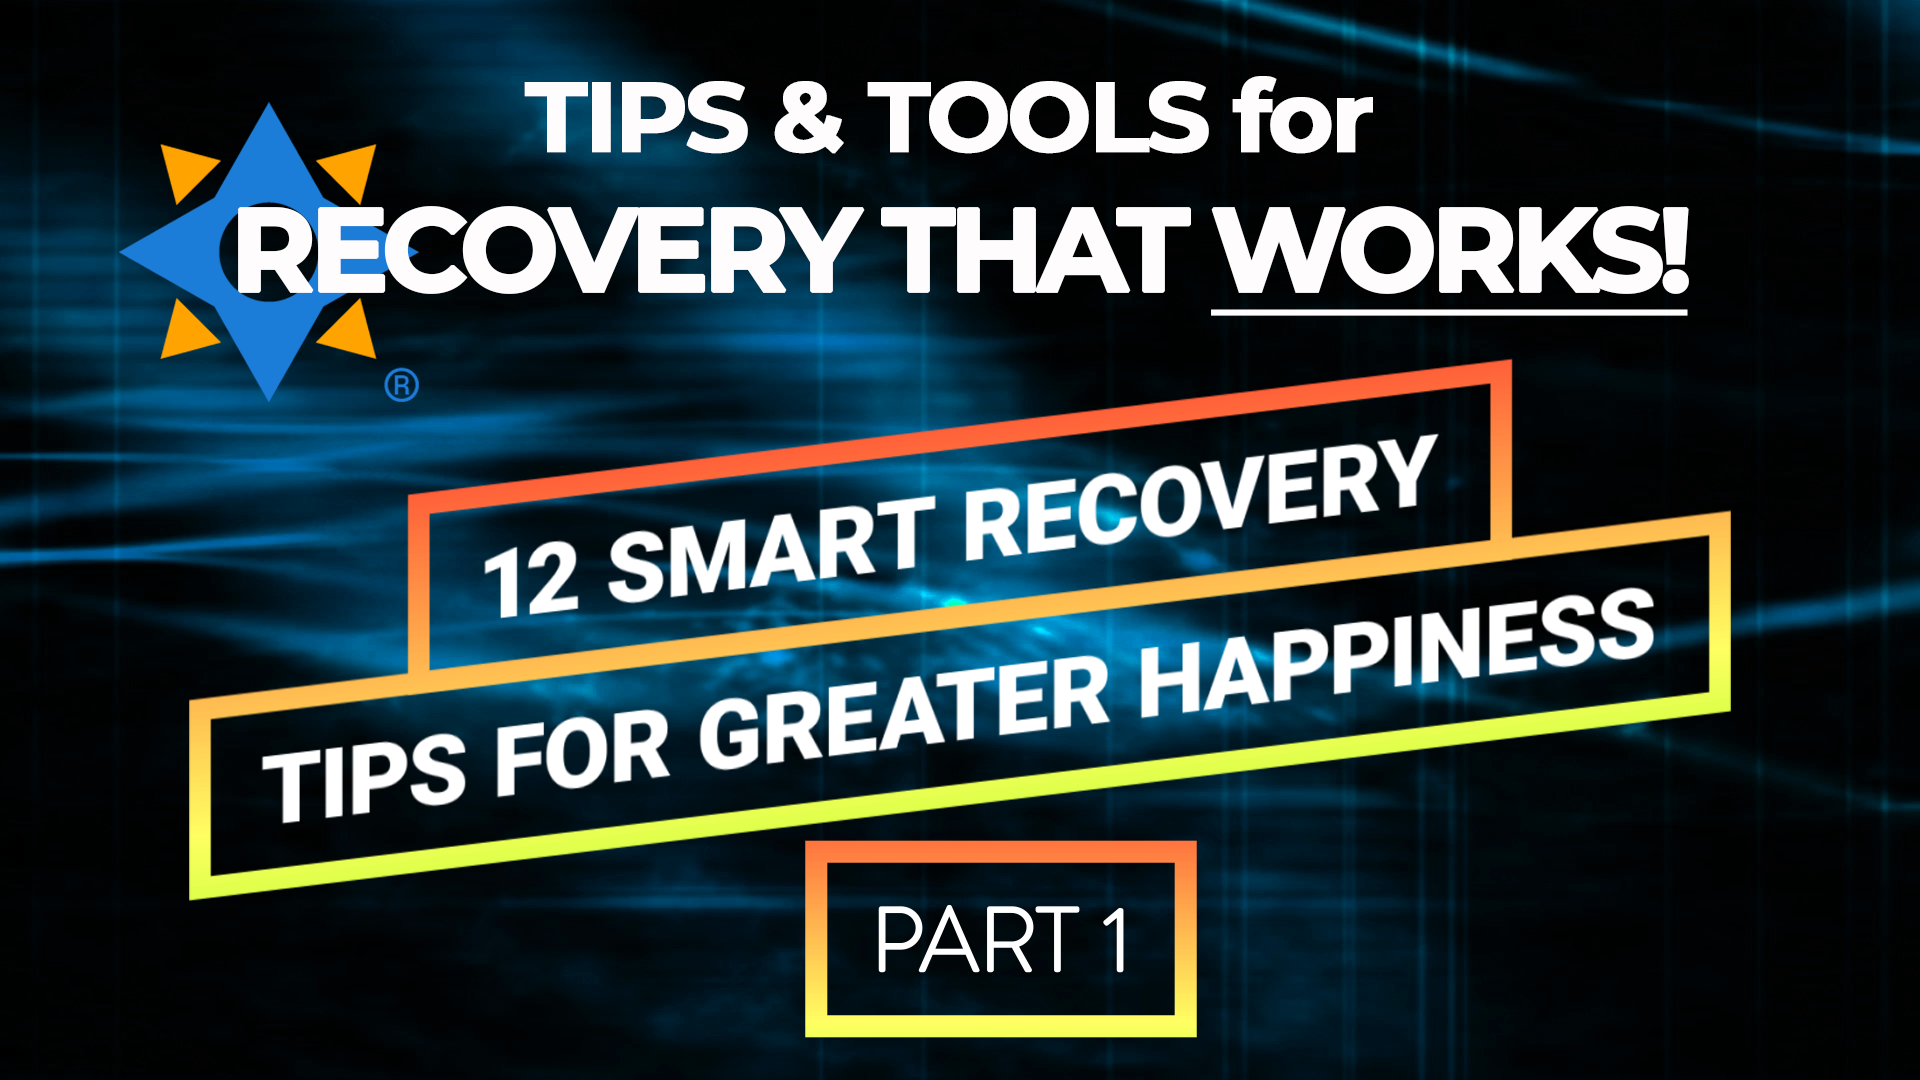 [Video] Keys to Happiness Part 1 – Tips & Tools for Recovery That Works!